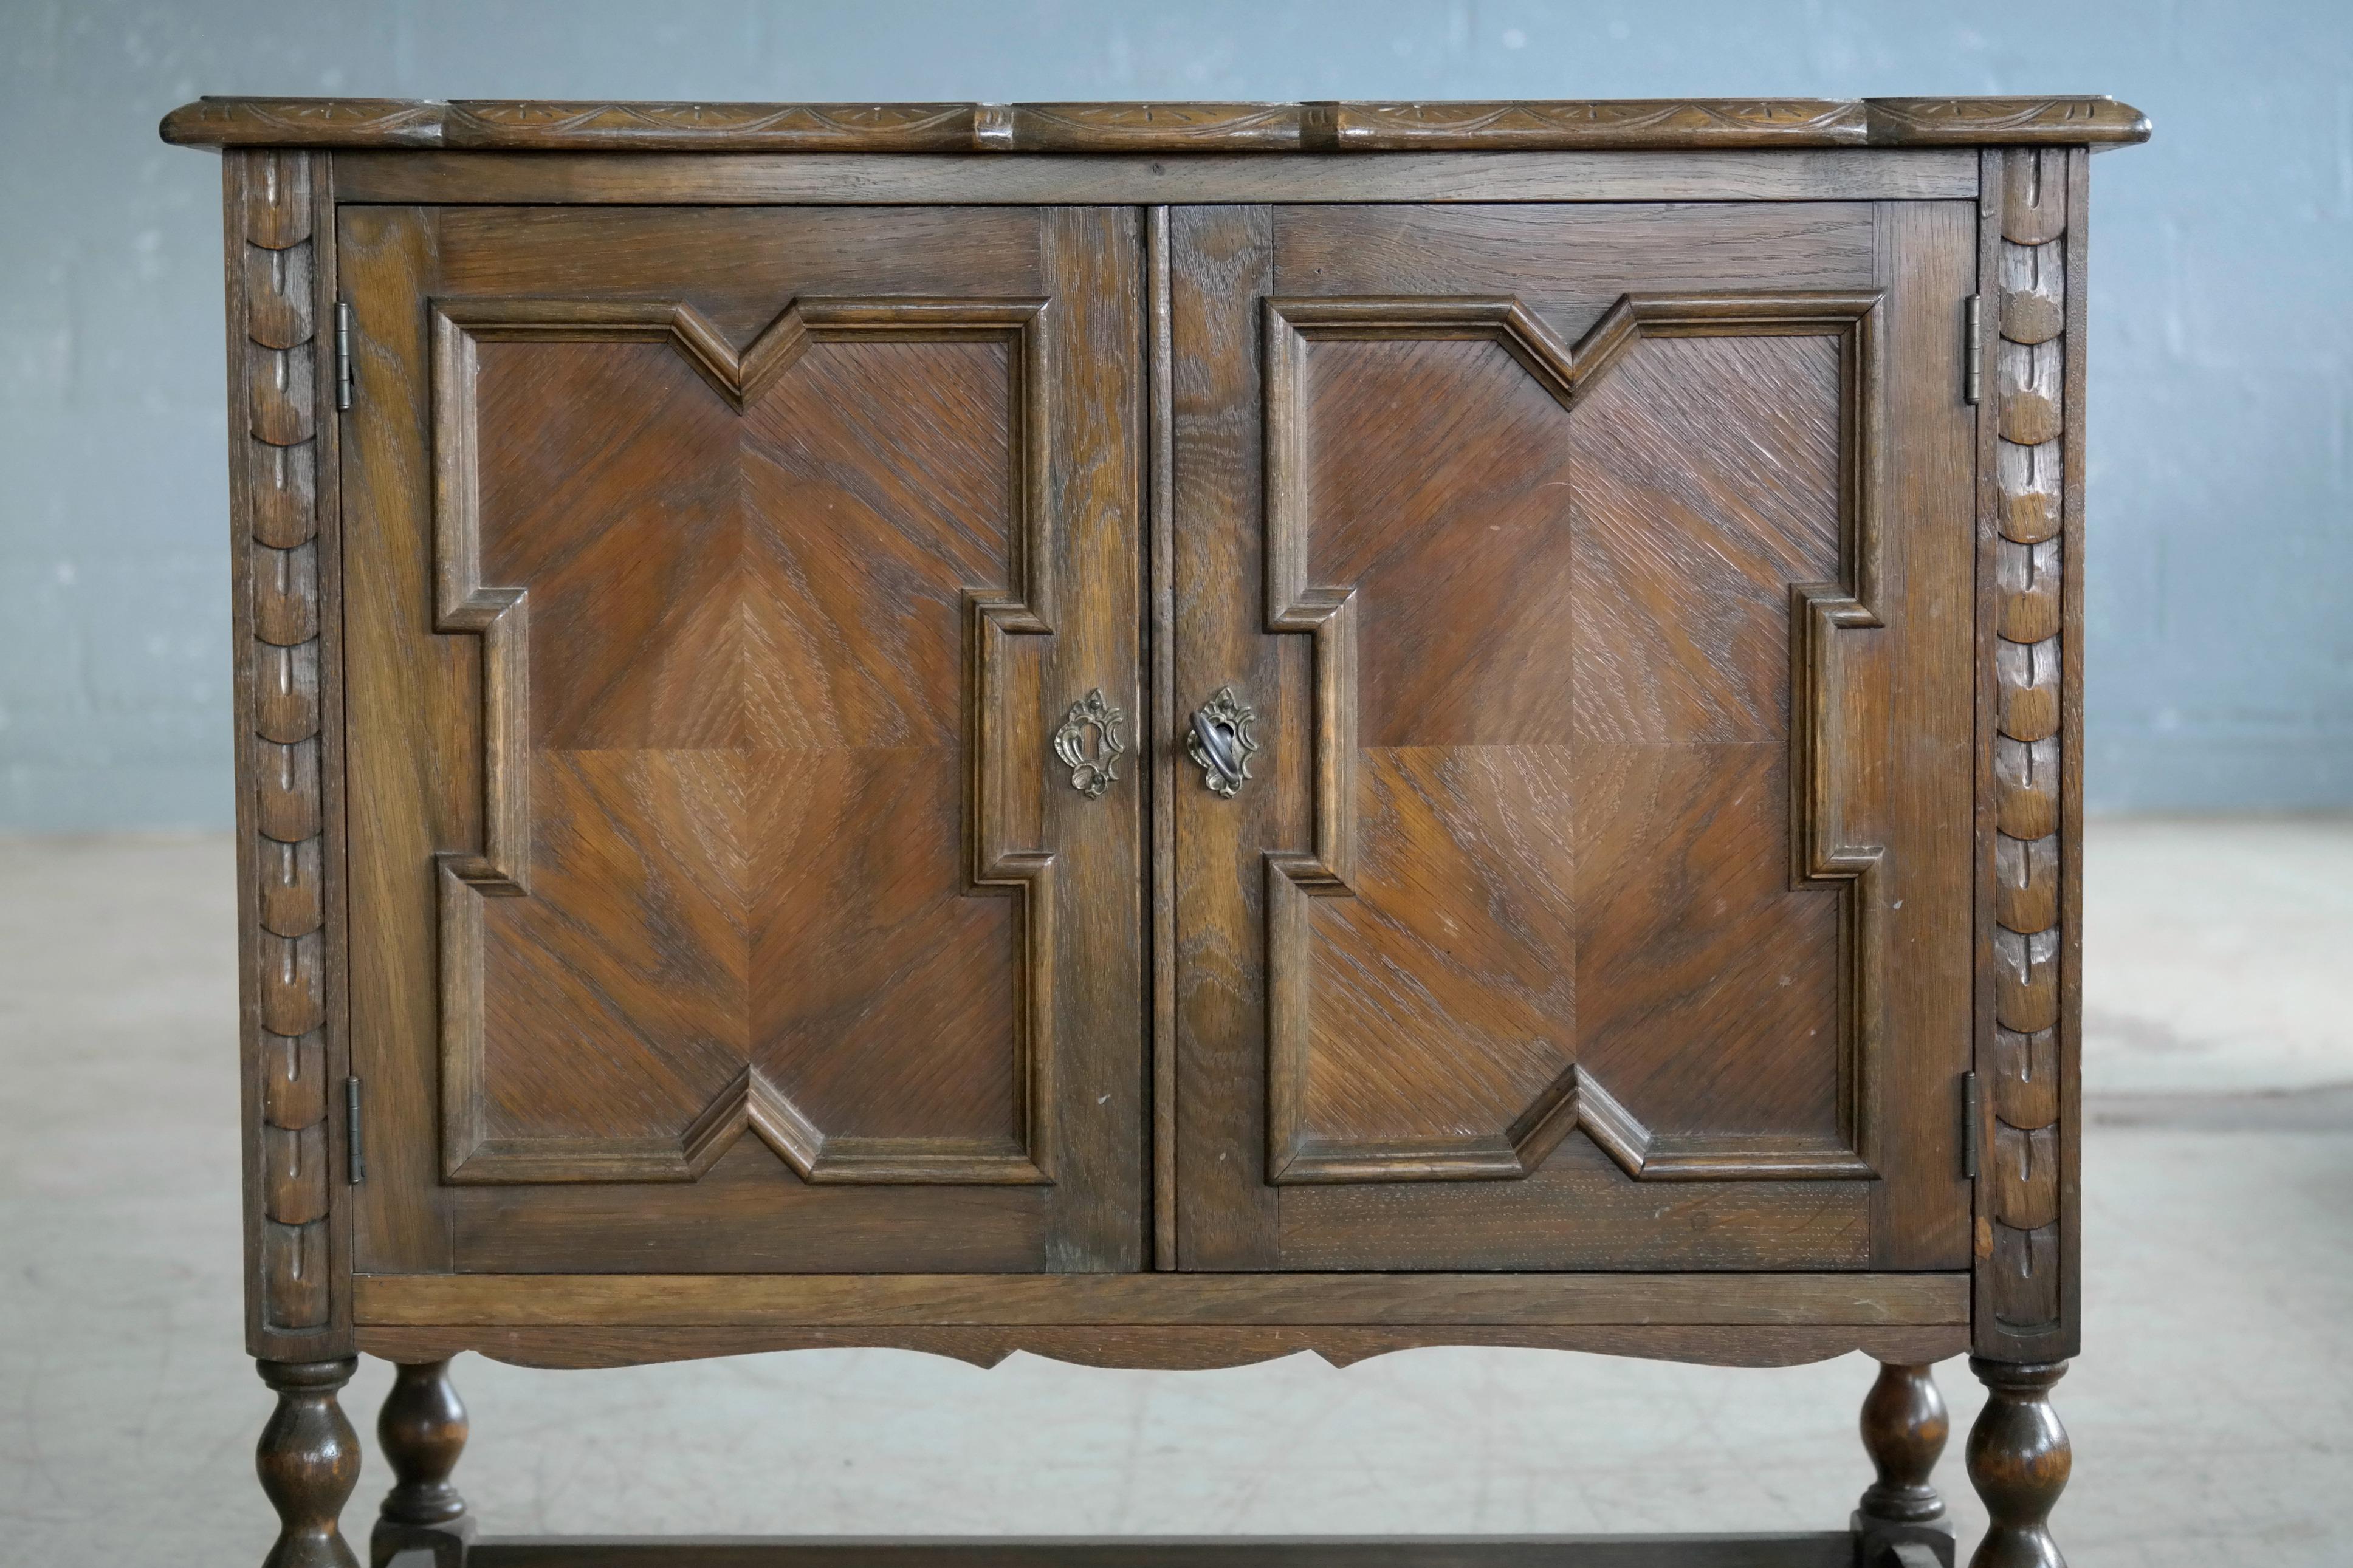 Art Deco Axel Einar Hjorth Attributed Small Console or Cabinet in Stained Oak circa 1940s